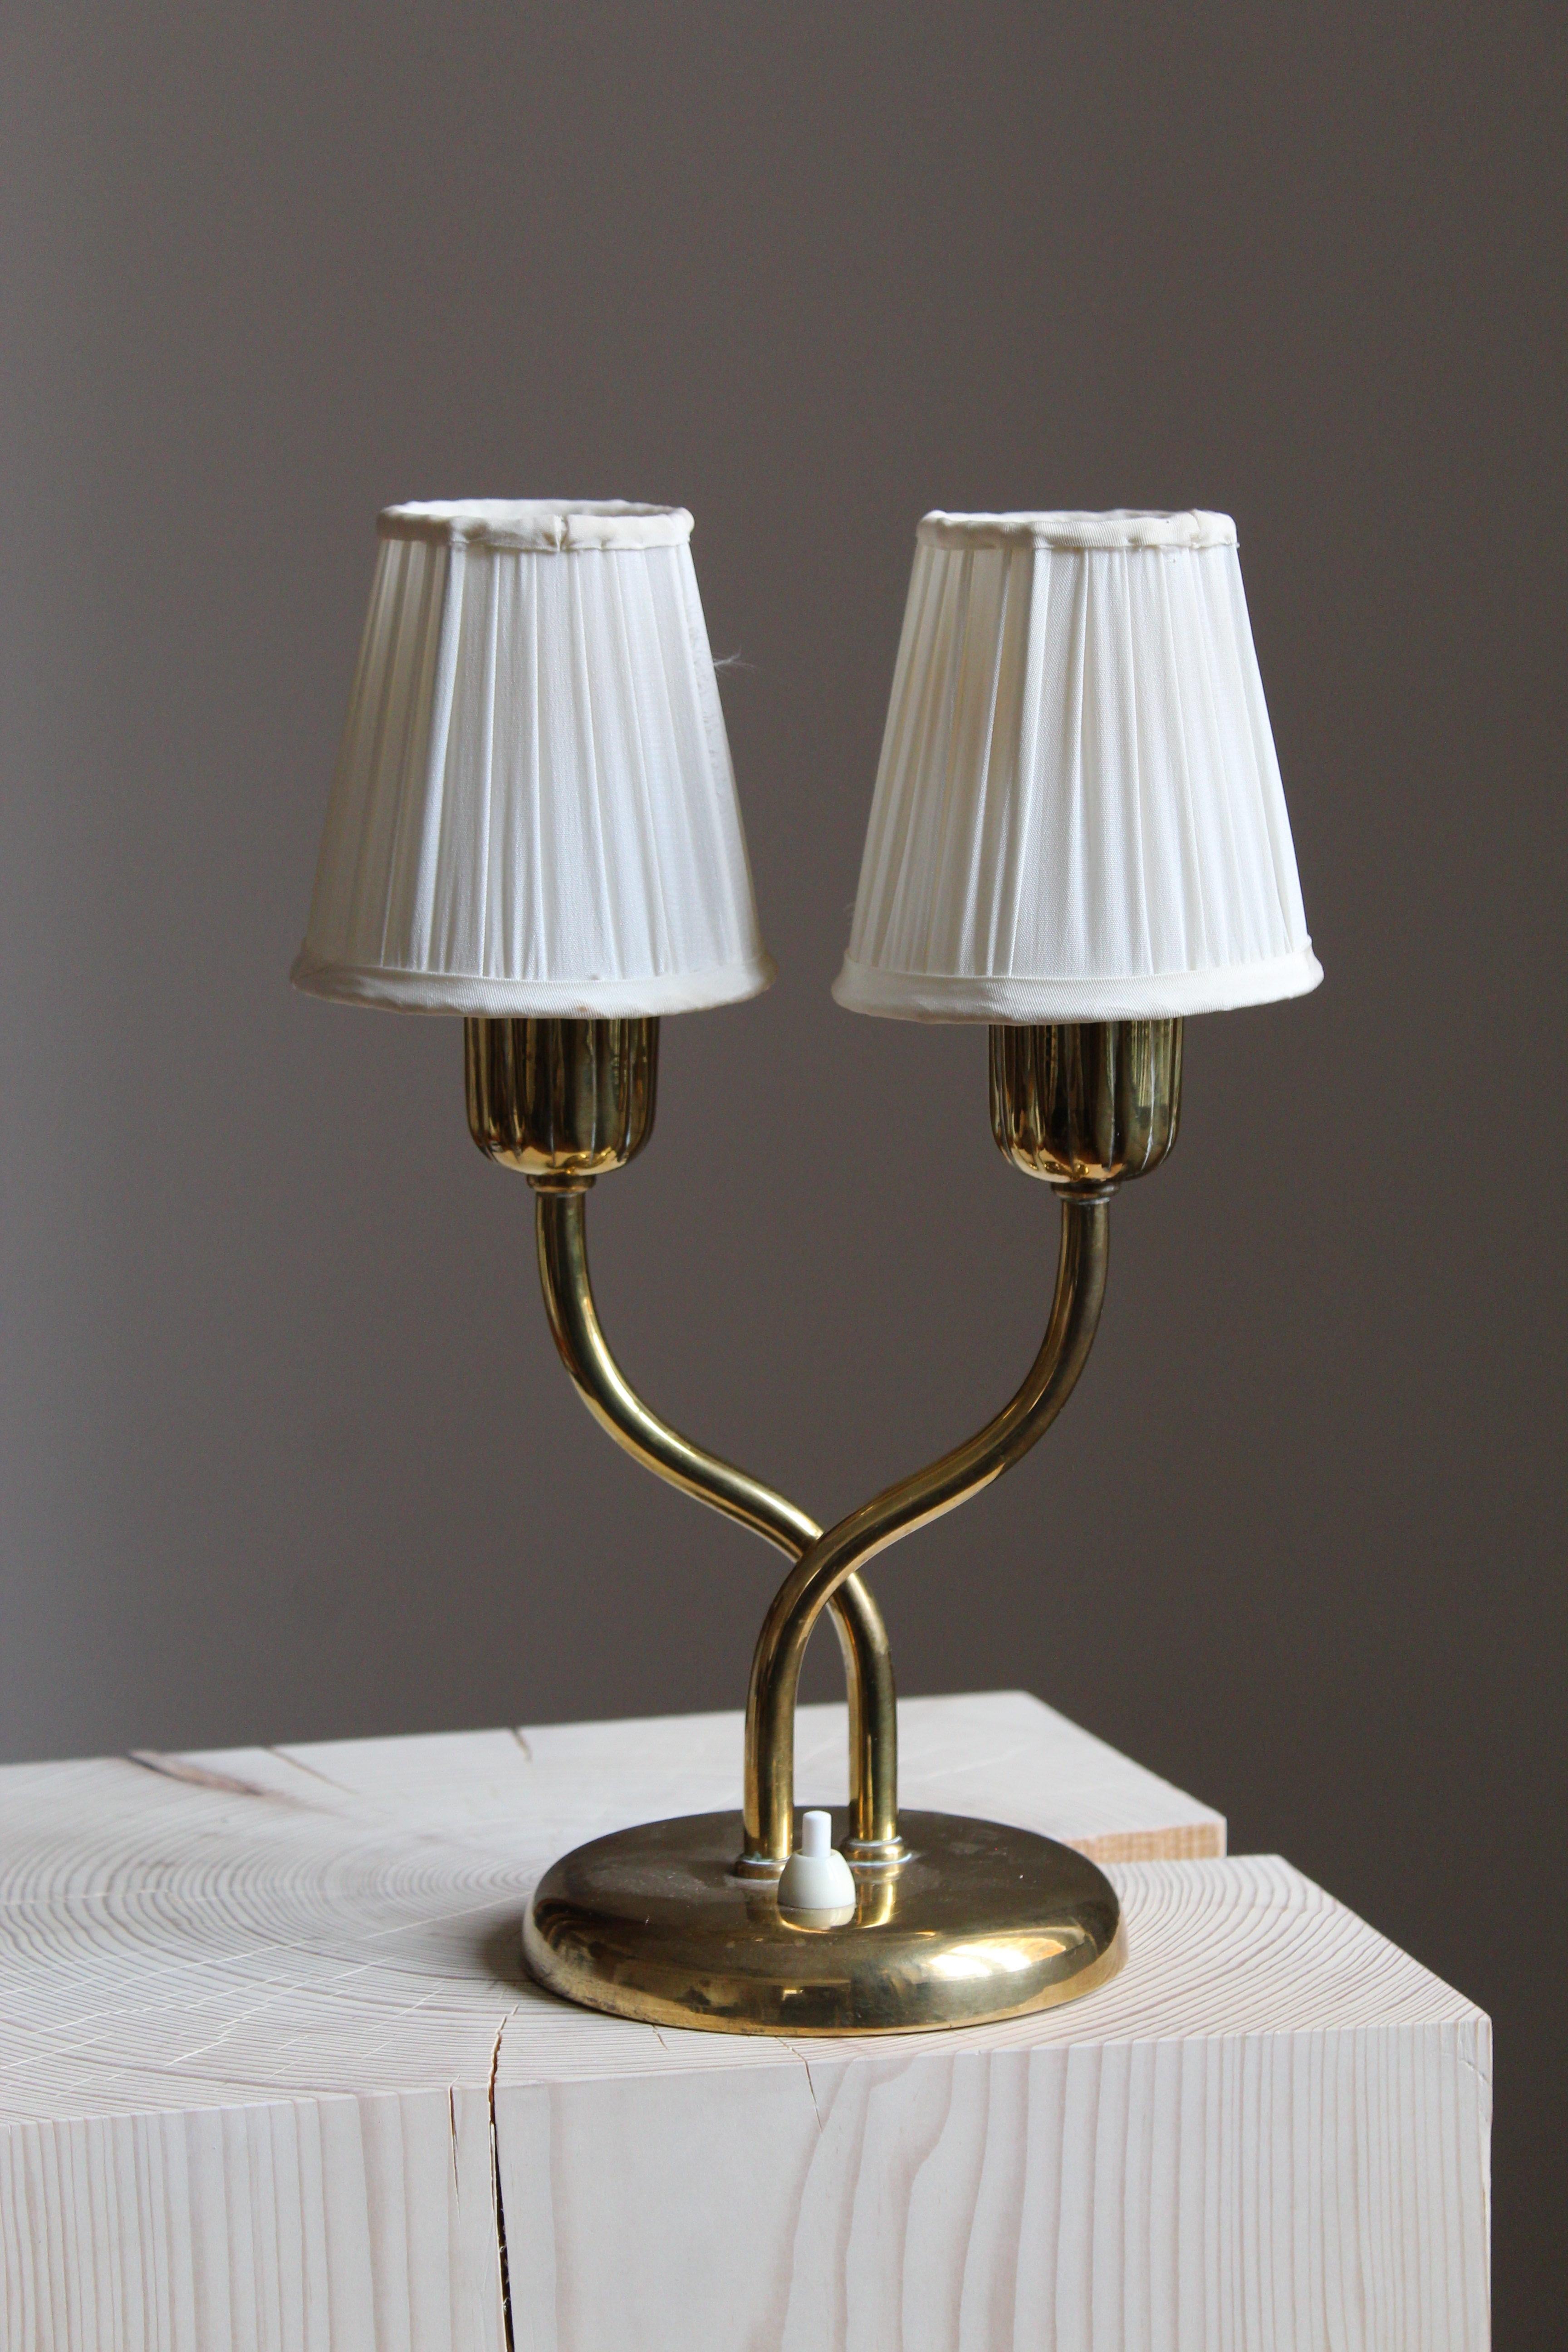 A table lamp or desk light. In brass. Produced by Böhlmarks, Sweden, 1940s.

Other designers of the period include Josef Frank, Paavo Tynell, Hans Bergström, Böhlmarks, and Jean Royère.